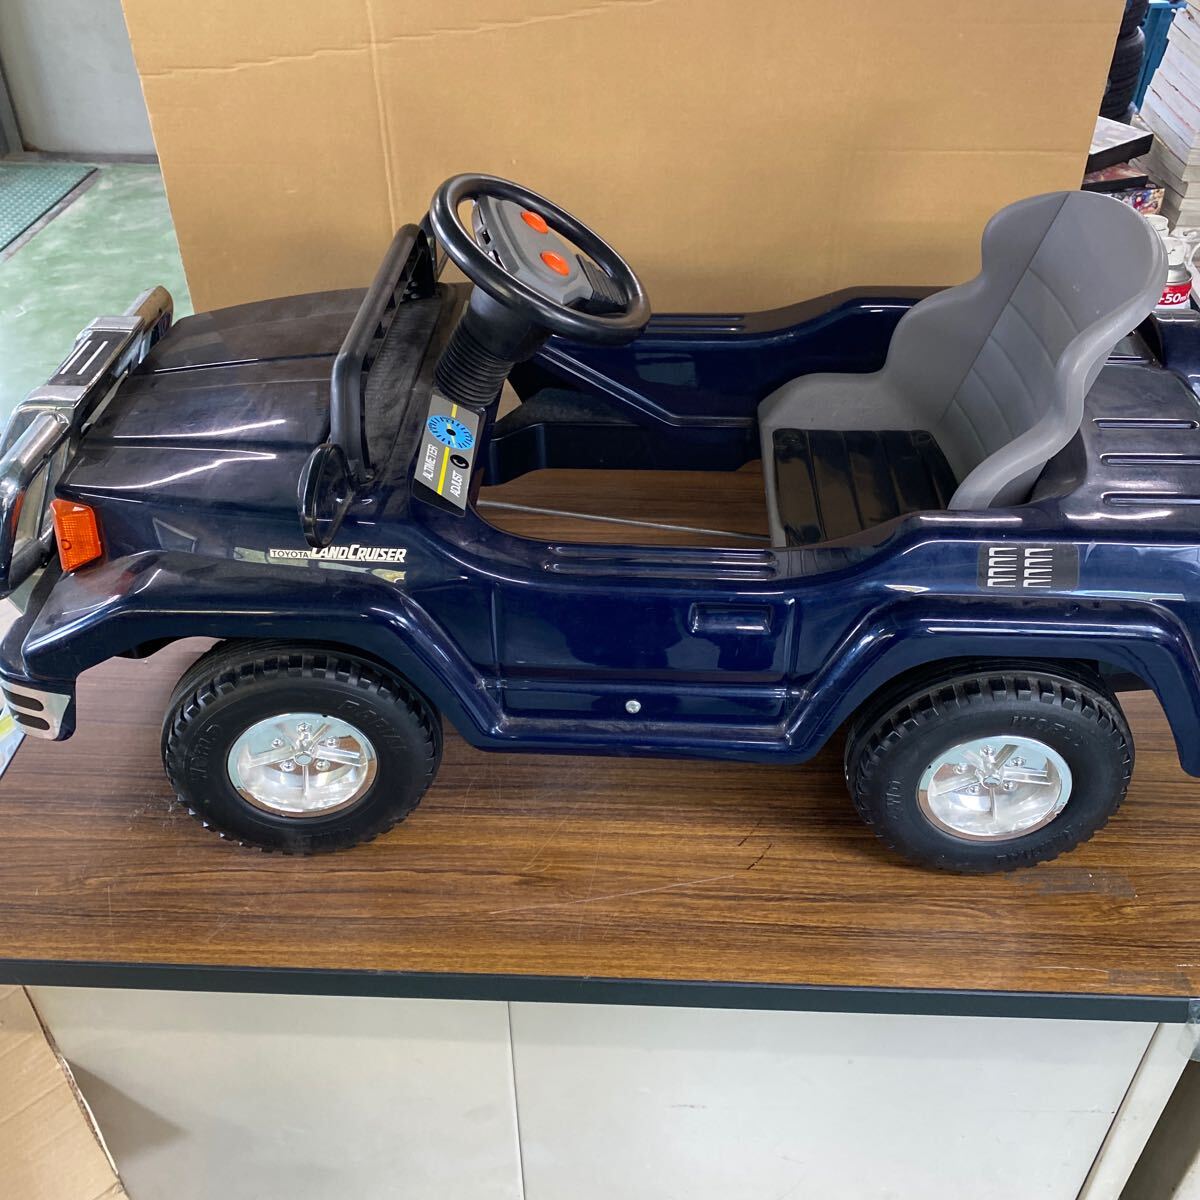  toy for riding Land Cruiser 5 -years old about till Land Cruiser high class that time thing z-0412-9